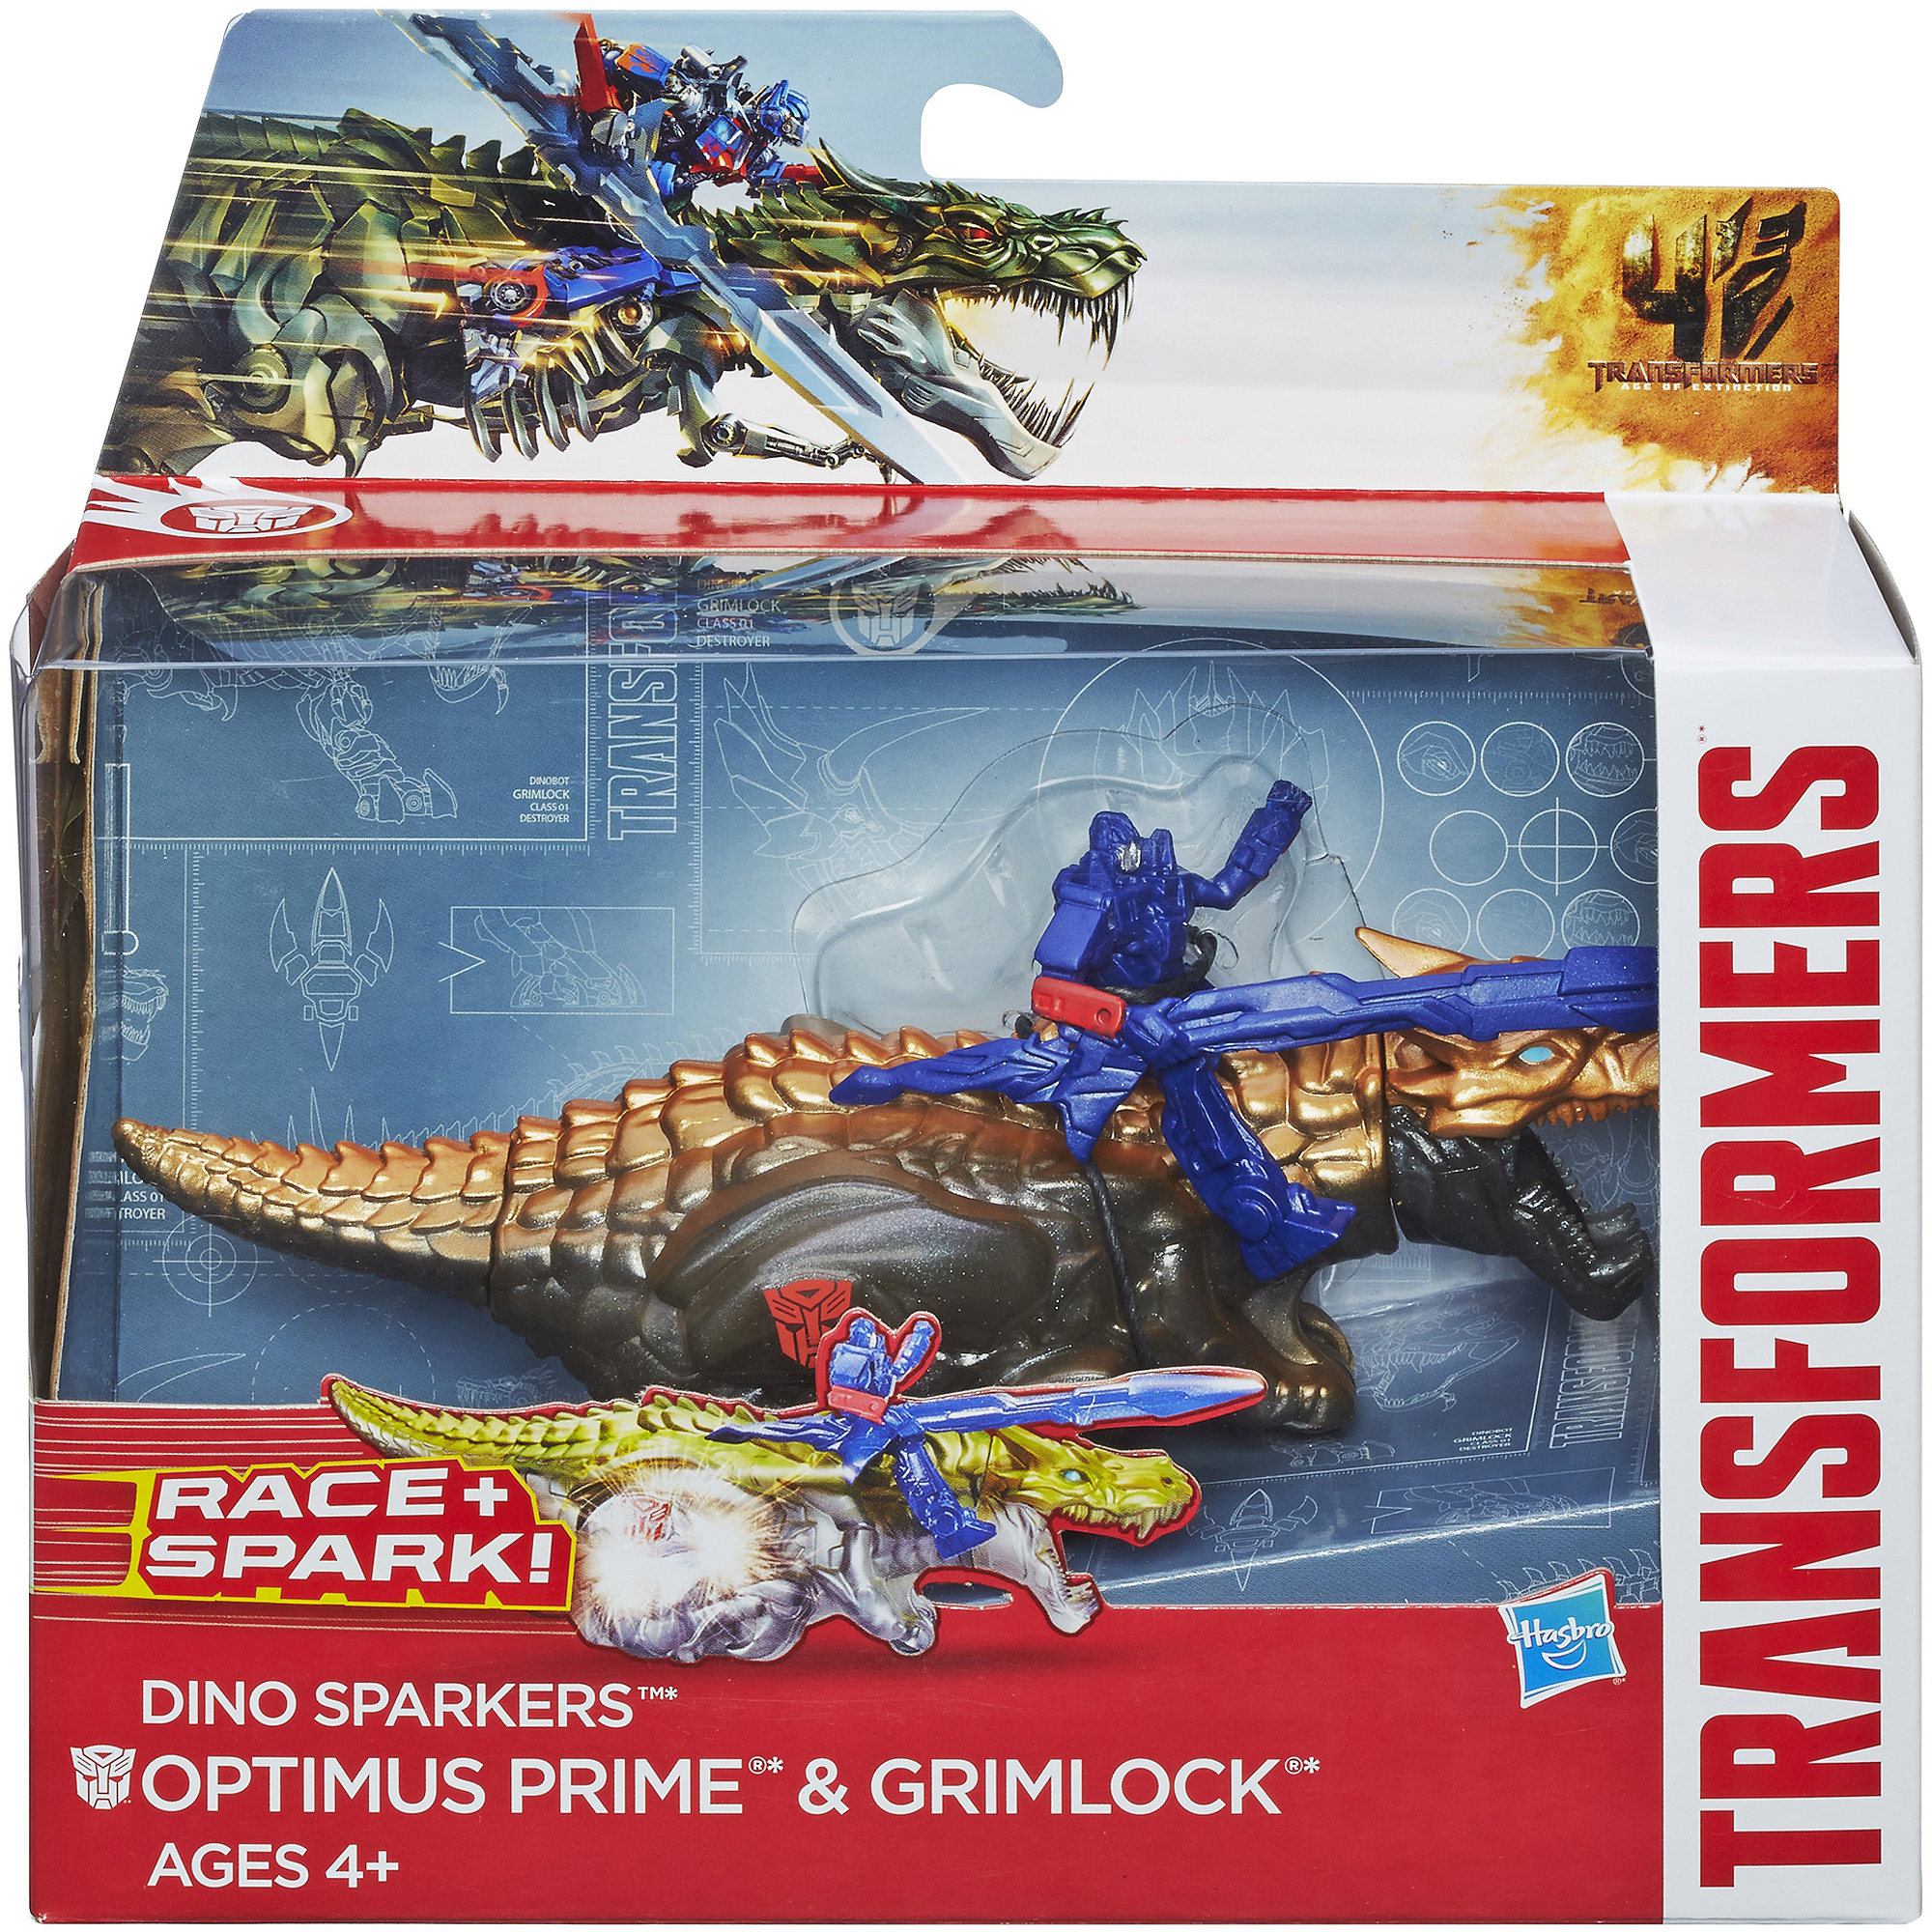 Transformers Age of Extinction Dino Sparkers Optimus Prime and Grimlock Figures - image 1 of 2